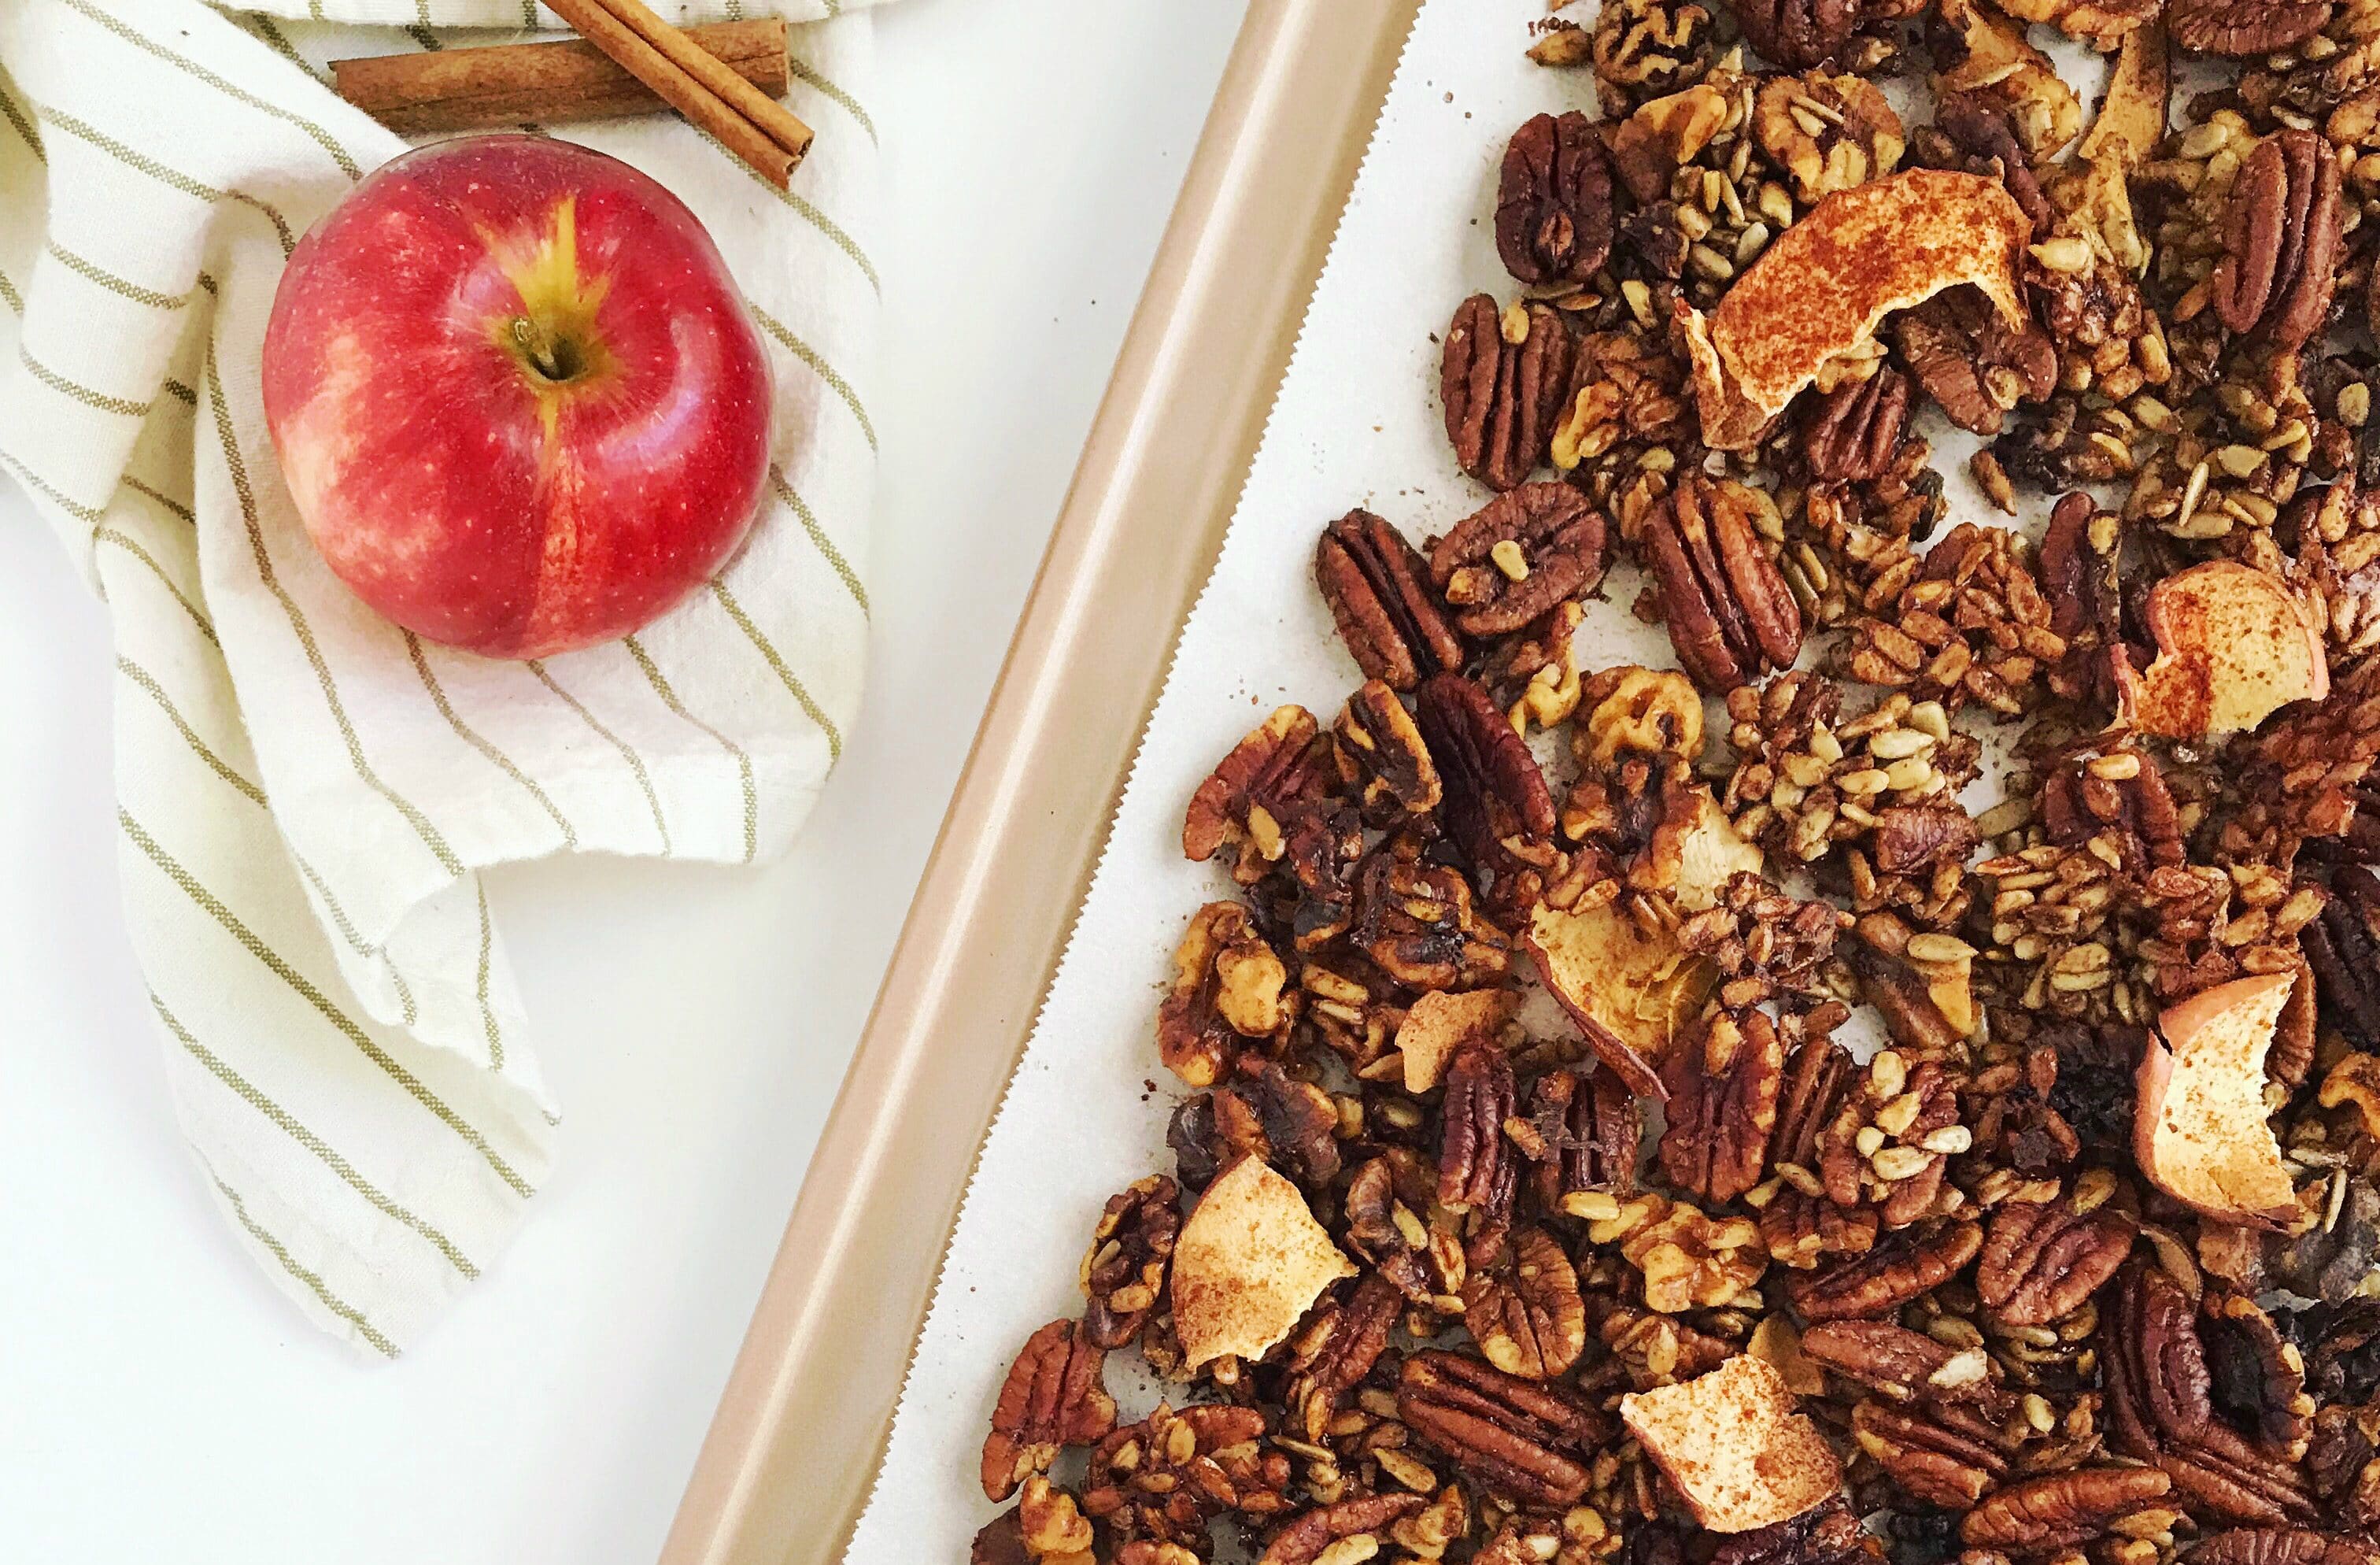 Grain-free cinnamon apple granola on a baking sheet with an apple and cinnamon sticks in the background.